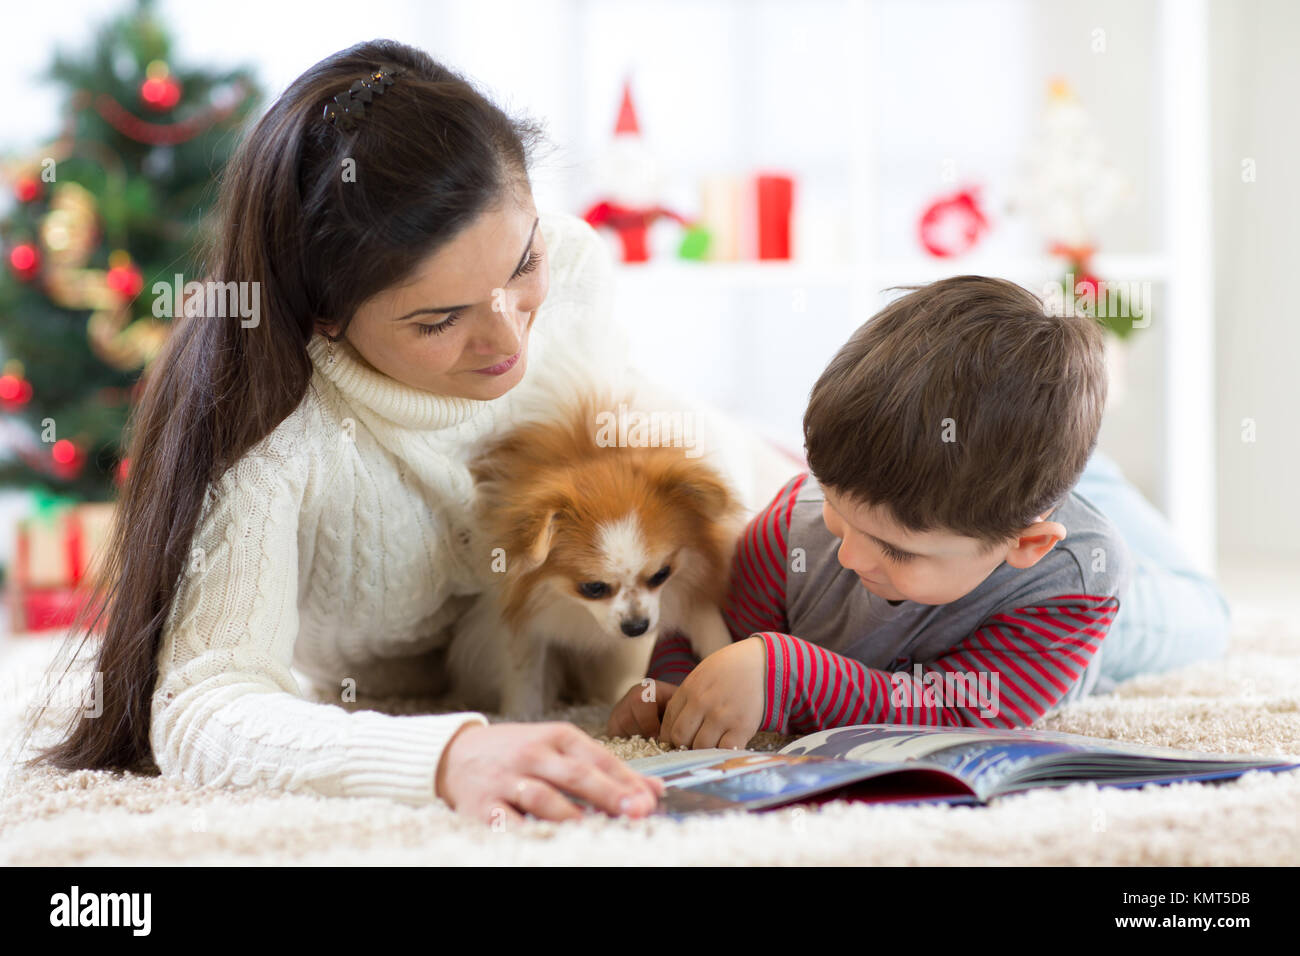 Merry Christmas and Happy New Year. Mom reading a book to her cute son near Christmas tree at home. Stock Photo